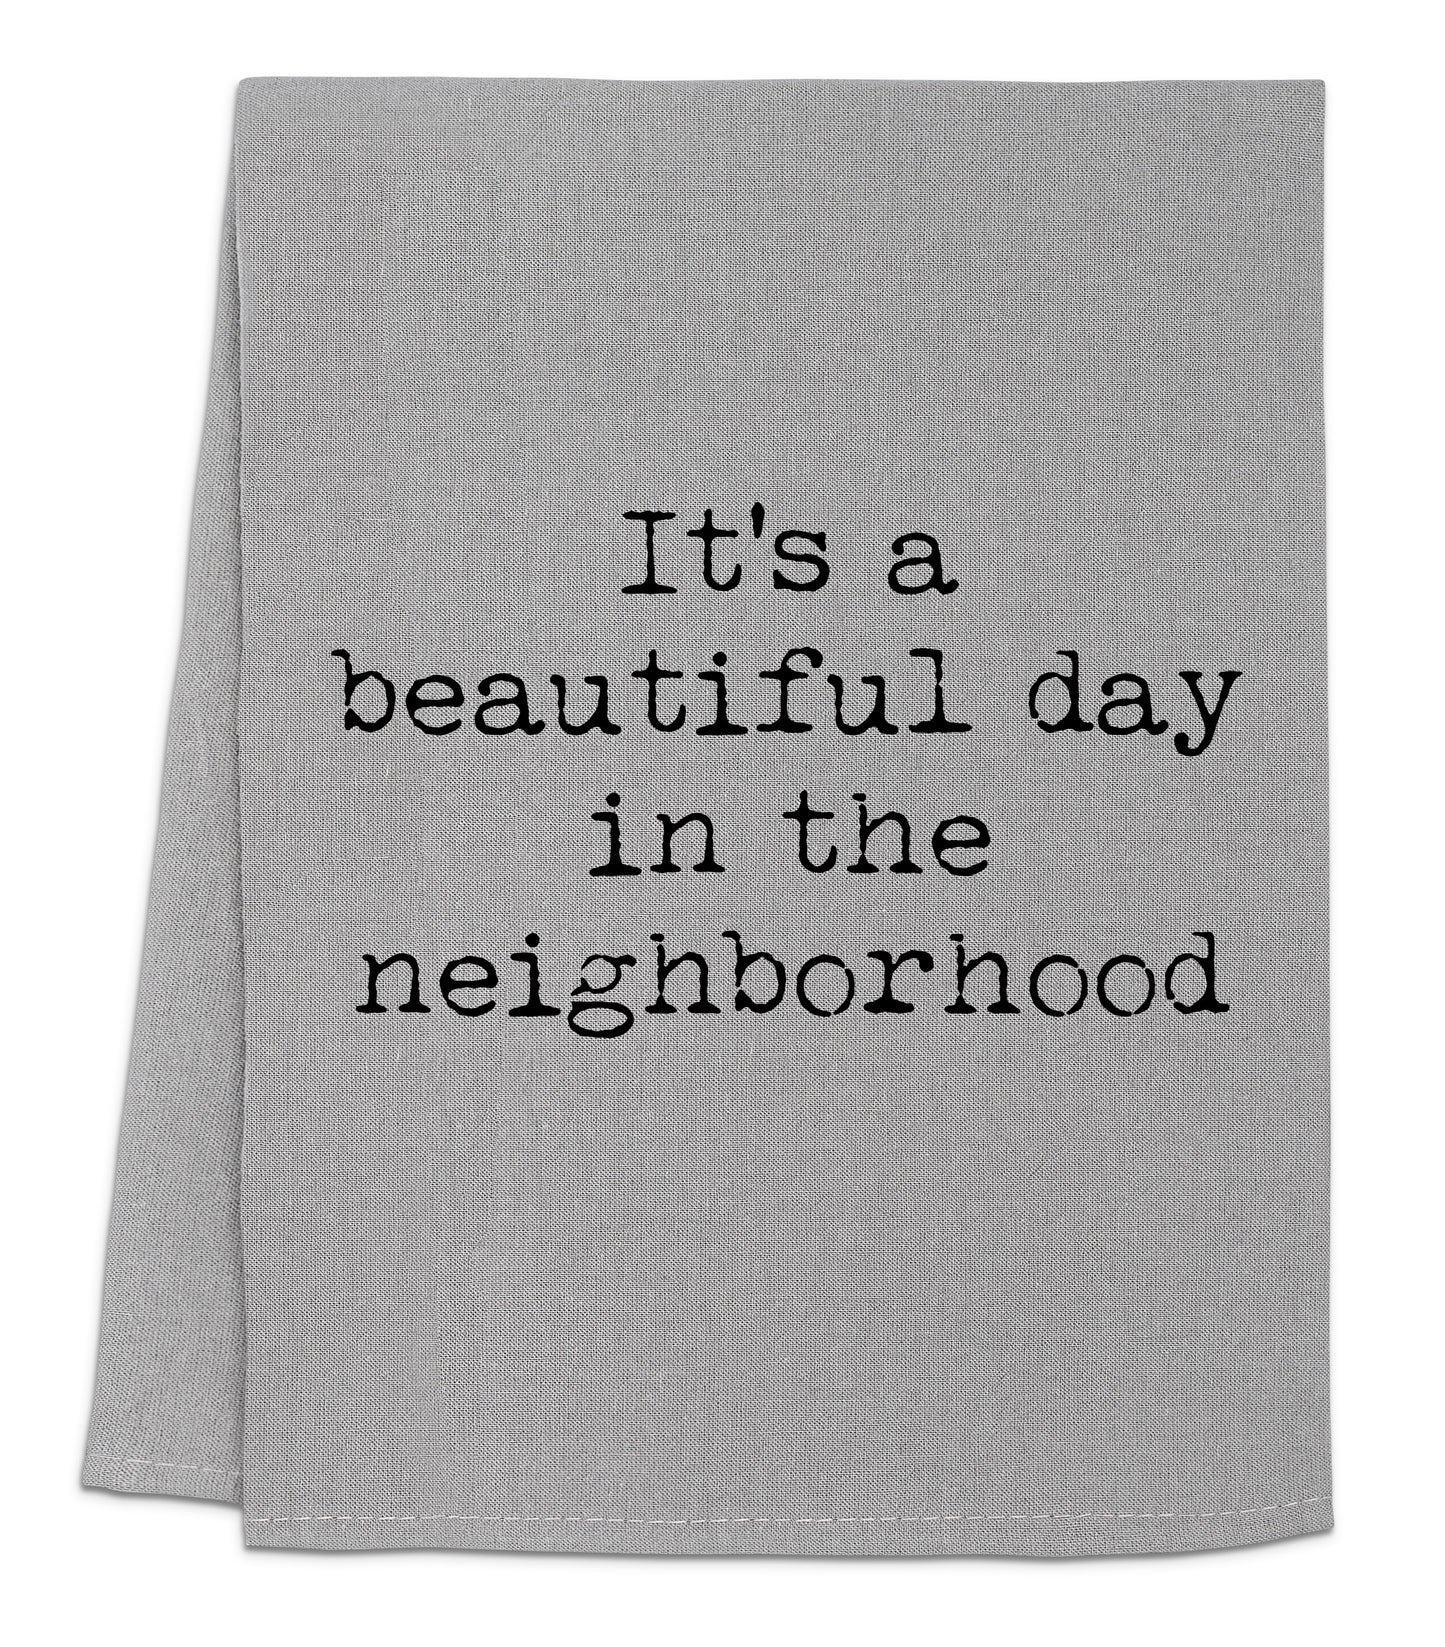 a towel that says it's a beautiful day in the neighborhood